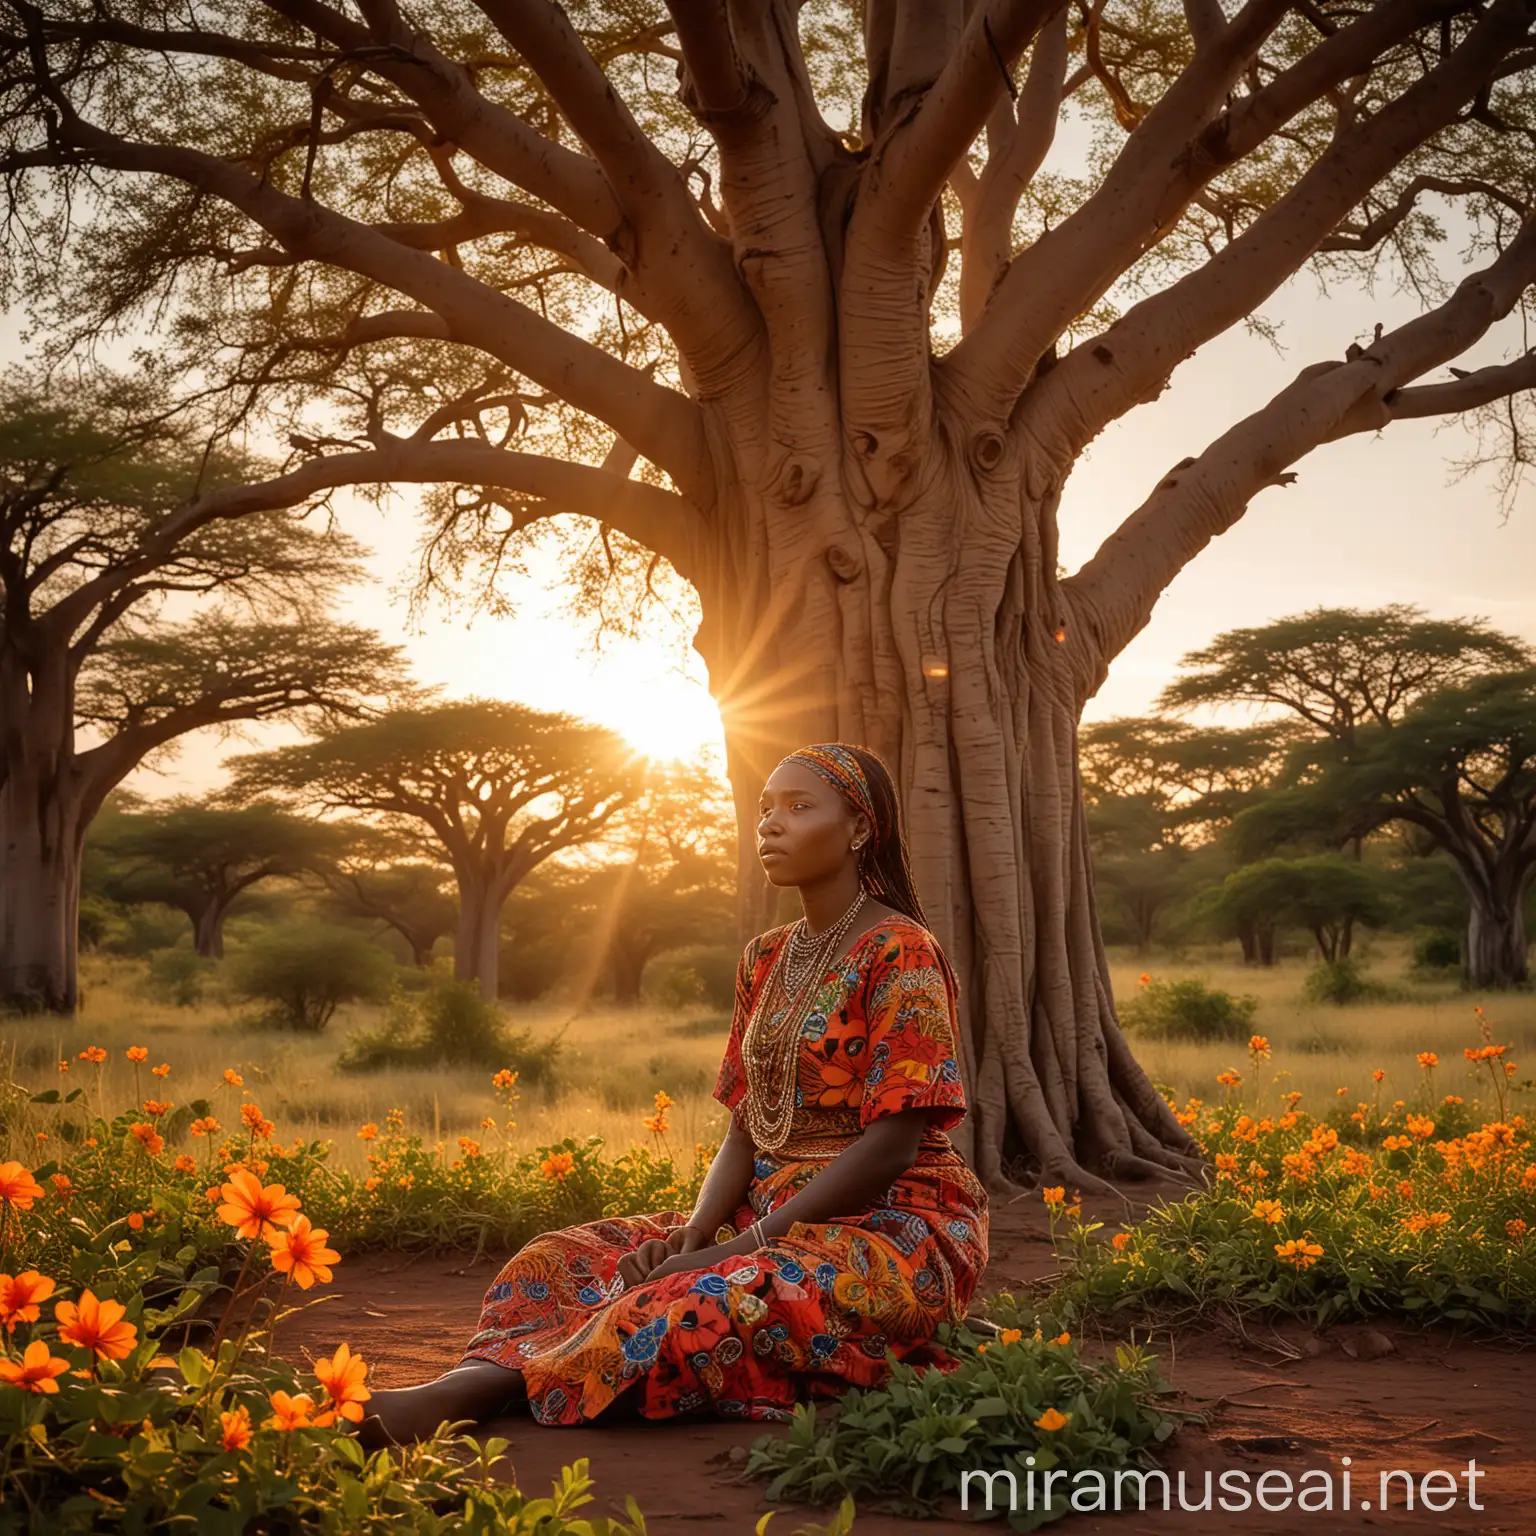 Serene African Savannah at Dusk with Majestic Baobab Tree and Women